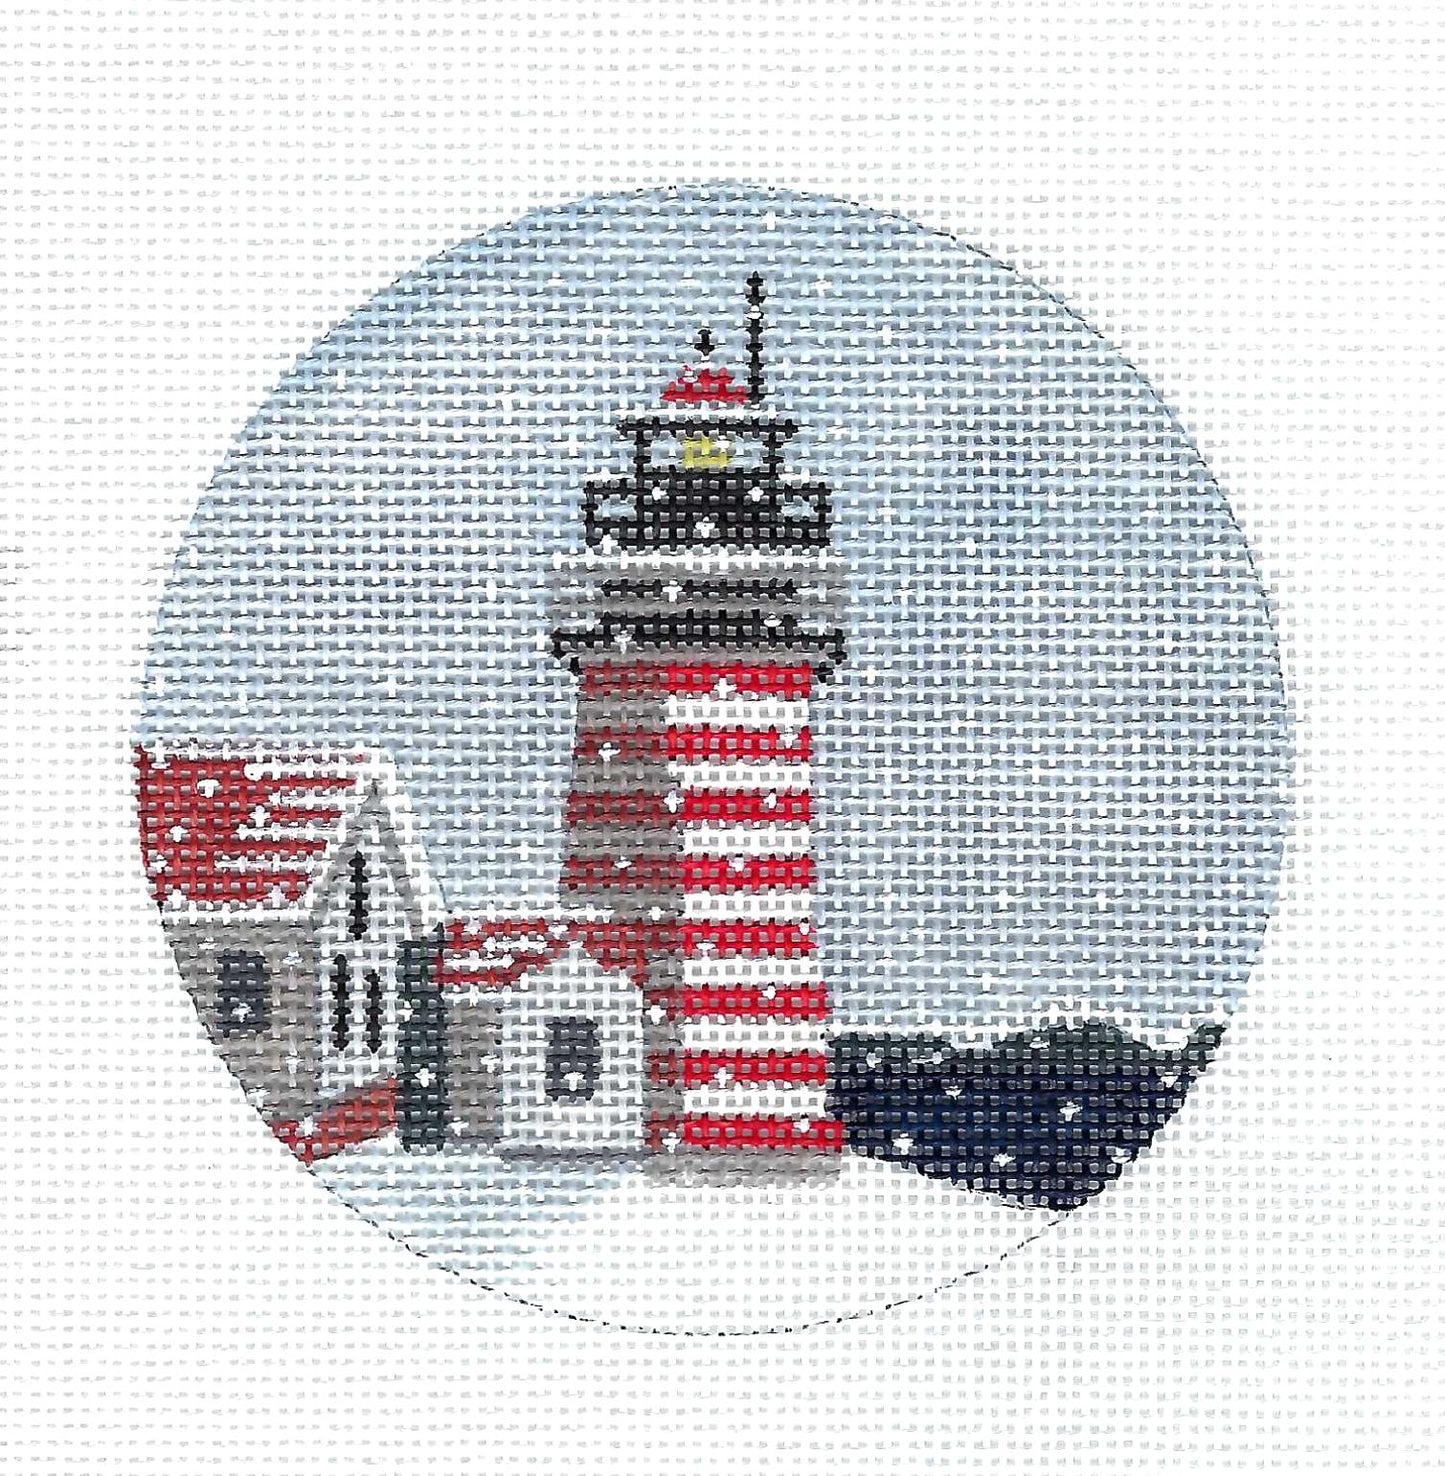 Travel Round ~ "West Quoddy Lighthouse in Maine" handpainted Needlepoint Canvas by Purple Palm